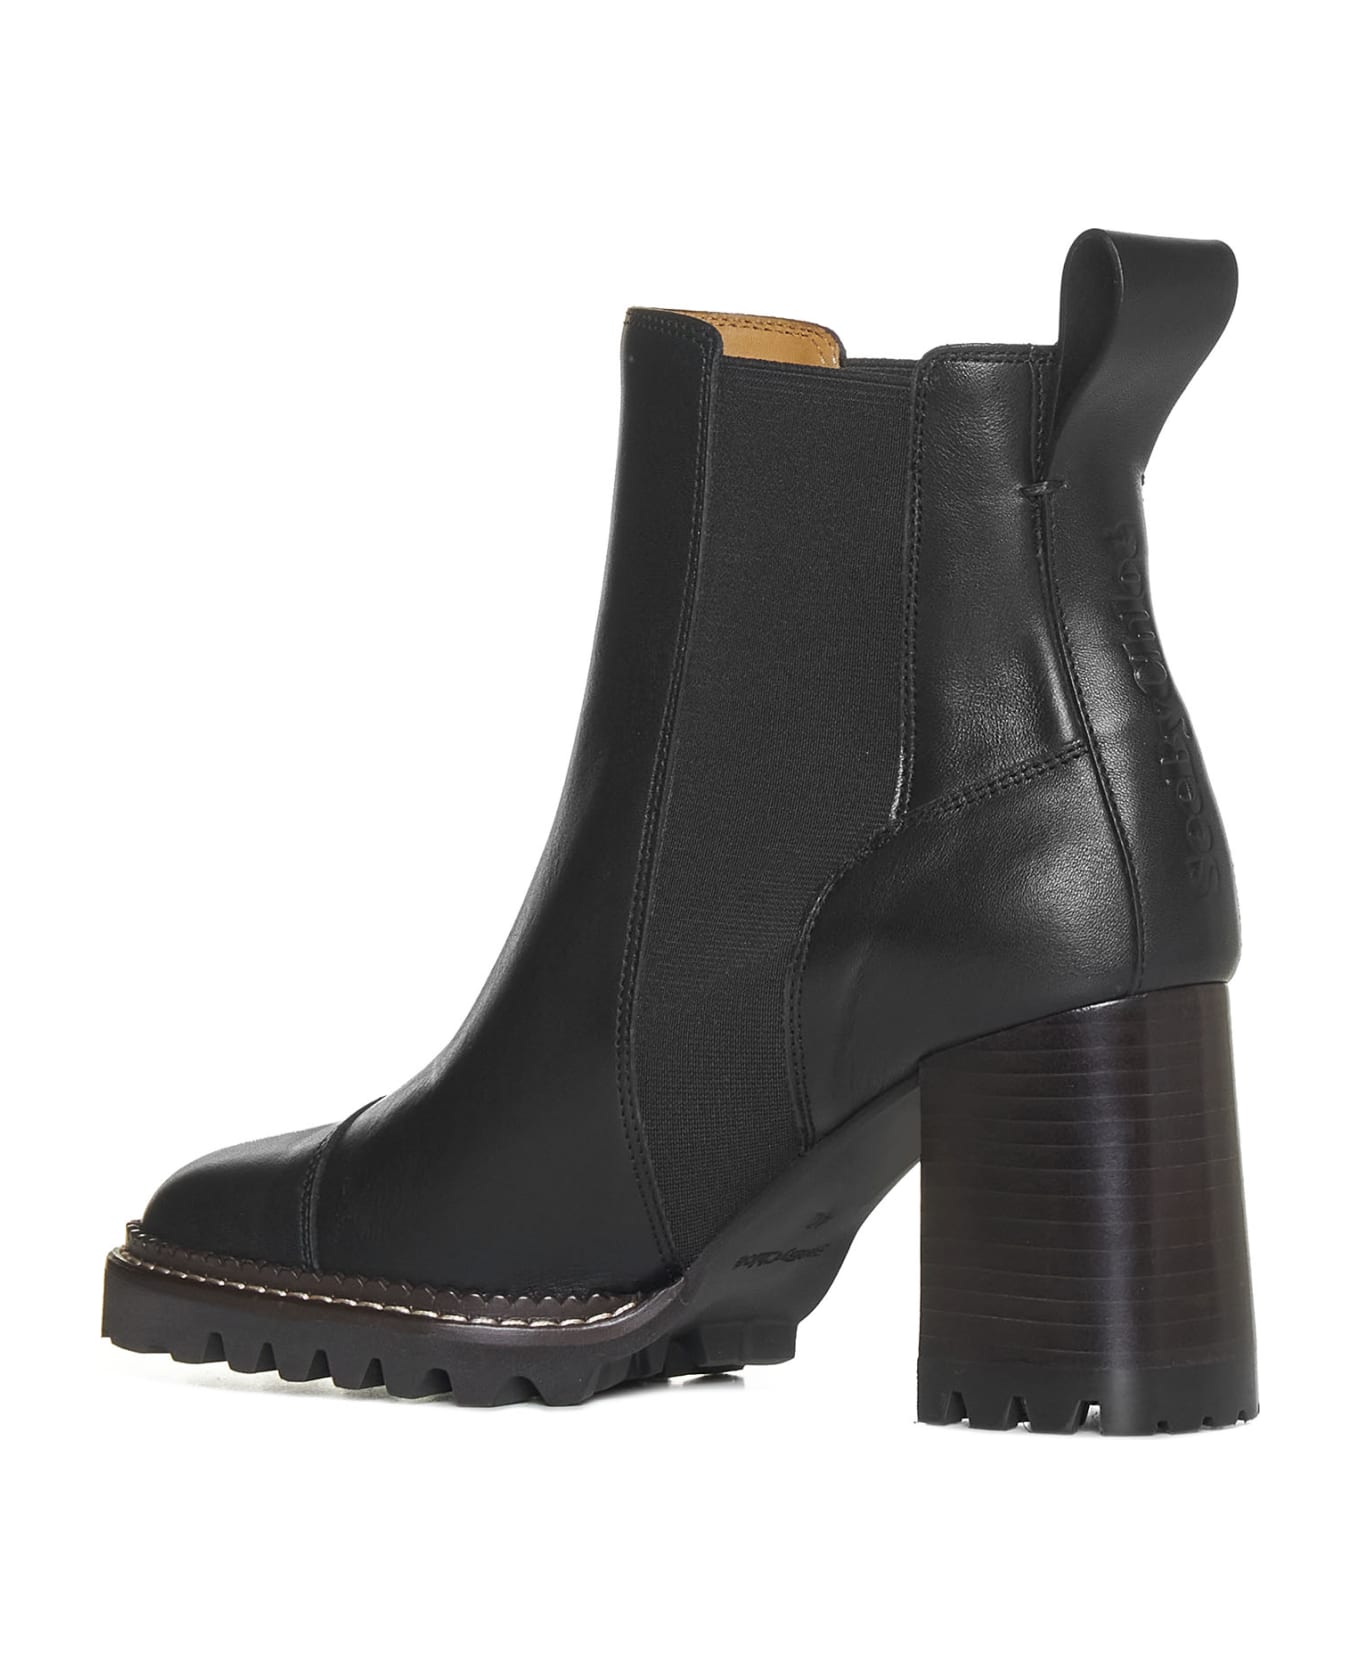 See by Chloé Boots - Black